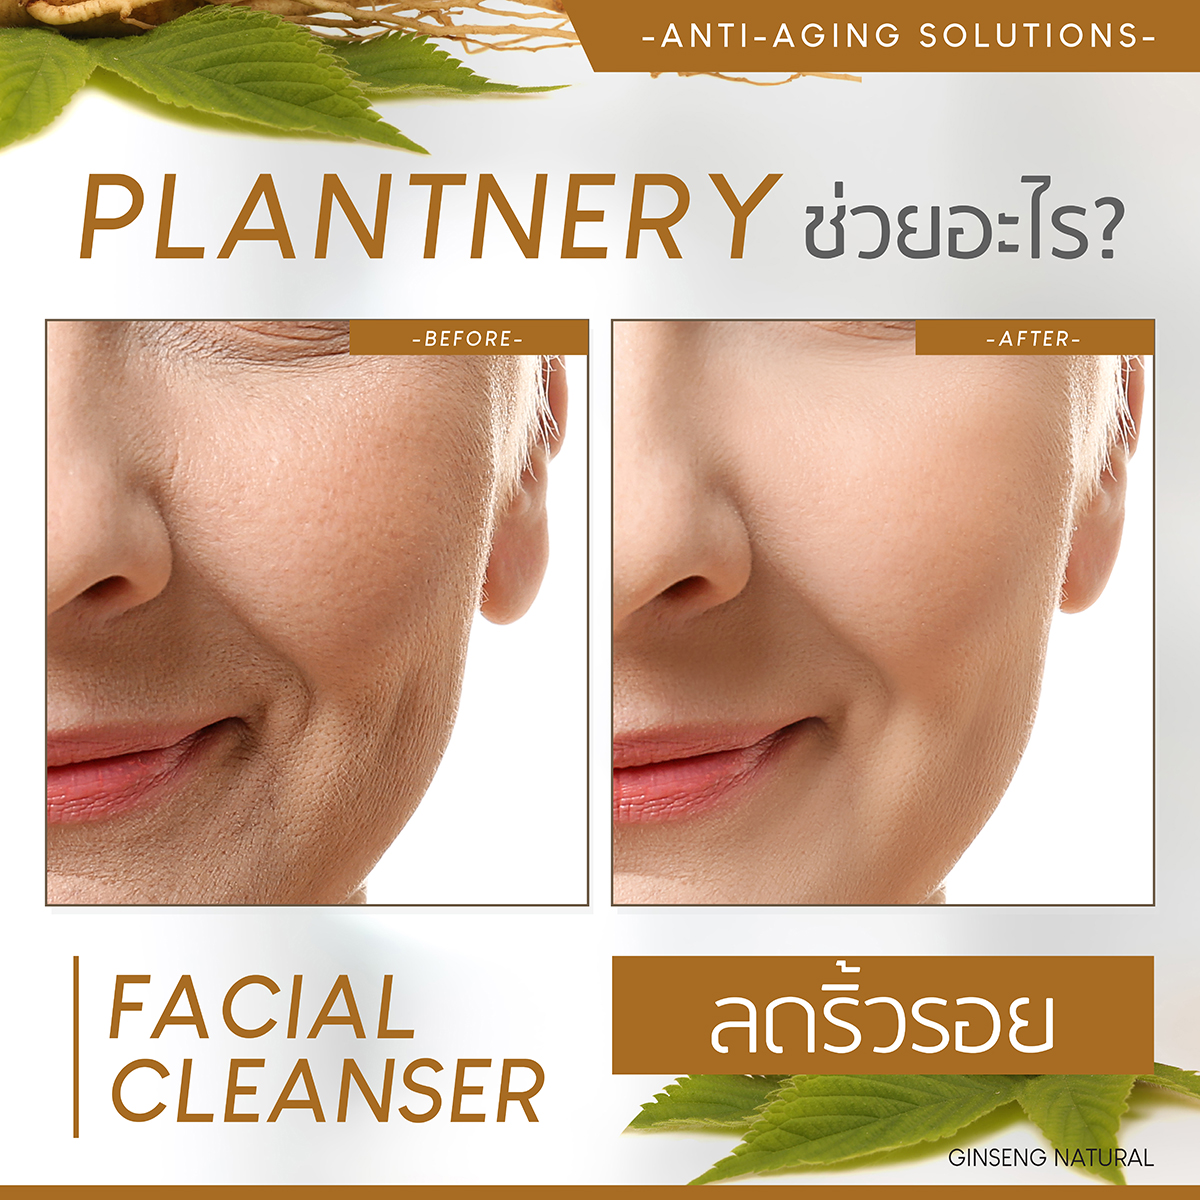 Plantnery Ginseng Facial Cleanser 250ml 